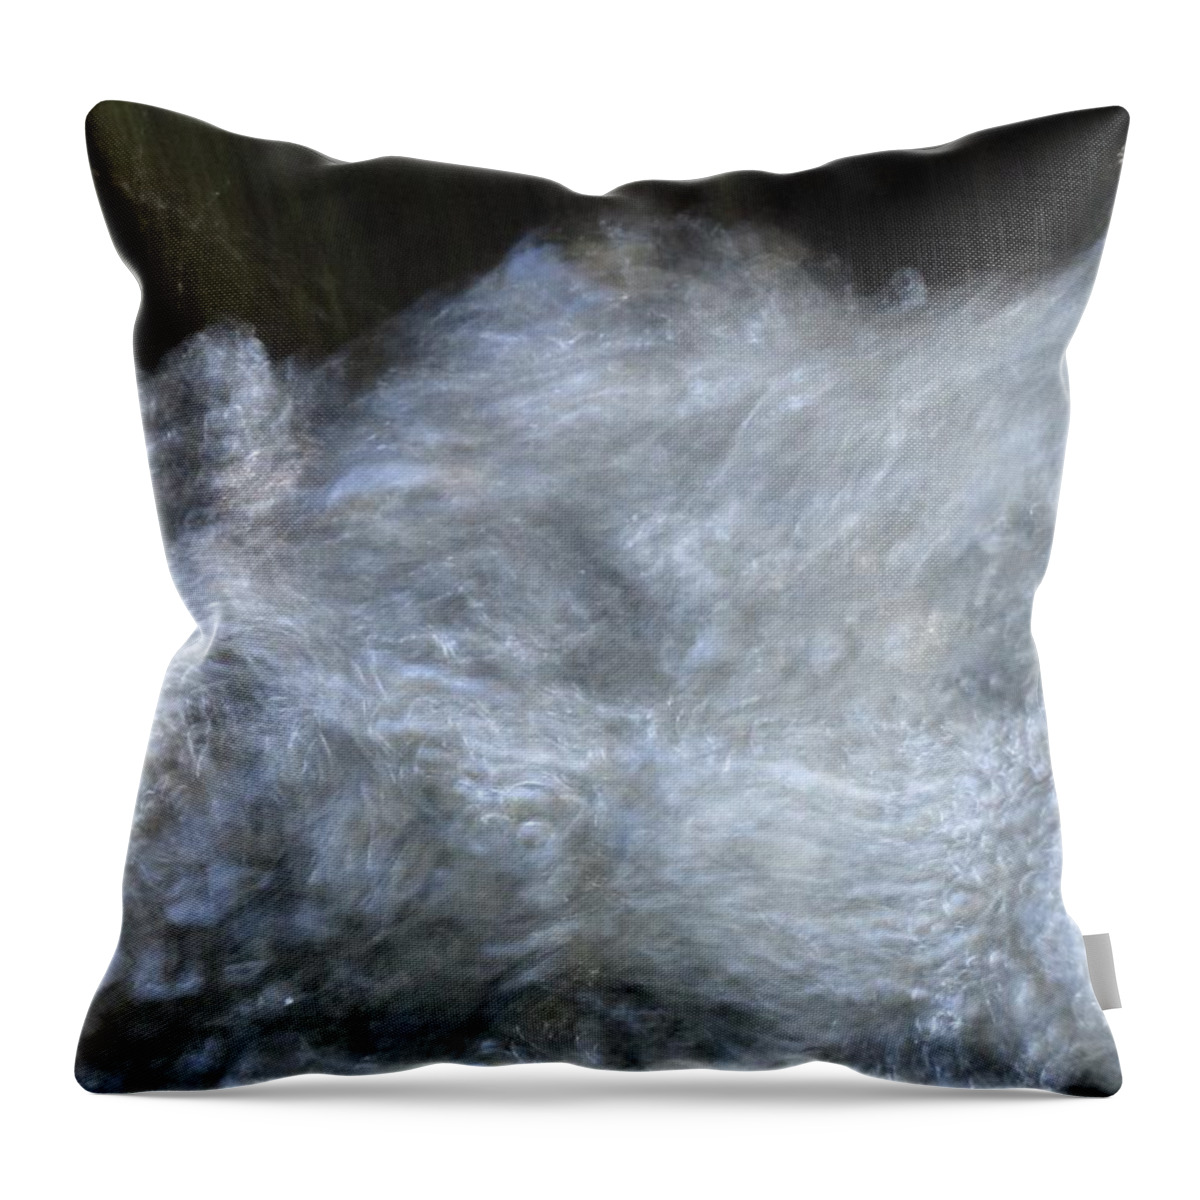 Water Throw Pillow featuring the photograph Water Rush by Ingrid Van Amsterdam